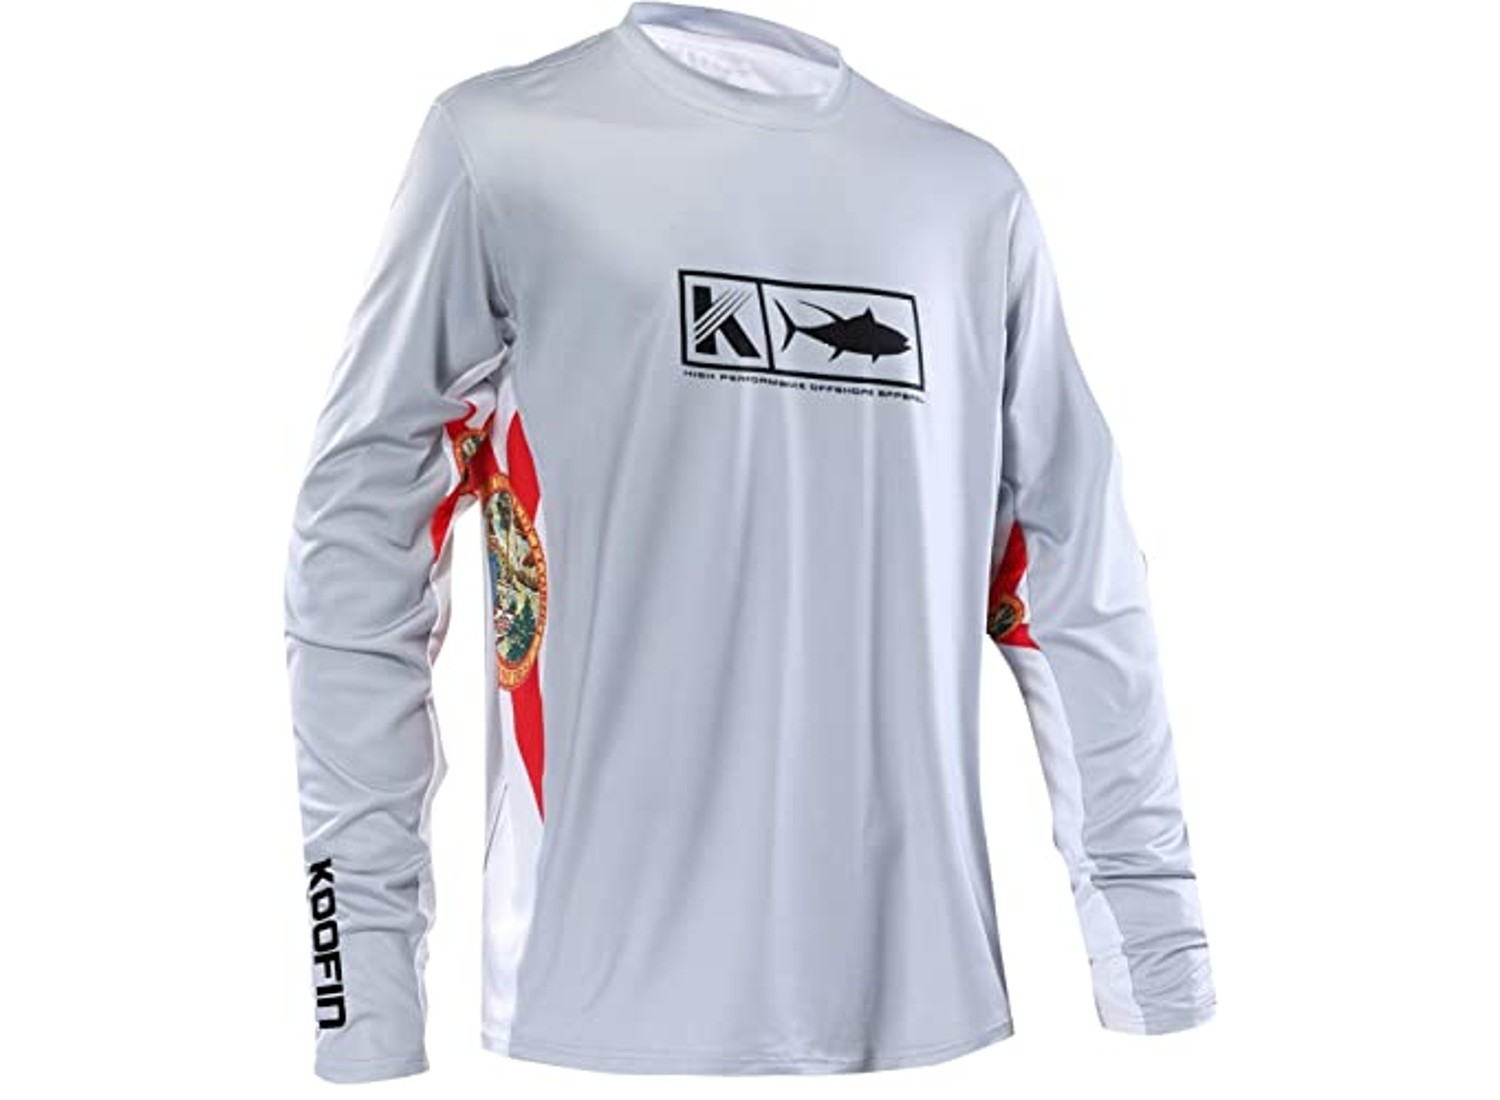 Aquaflage Long Sleeve Performance Shirt Review - Wired2Fish